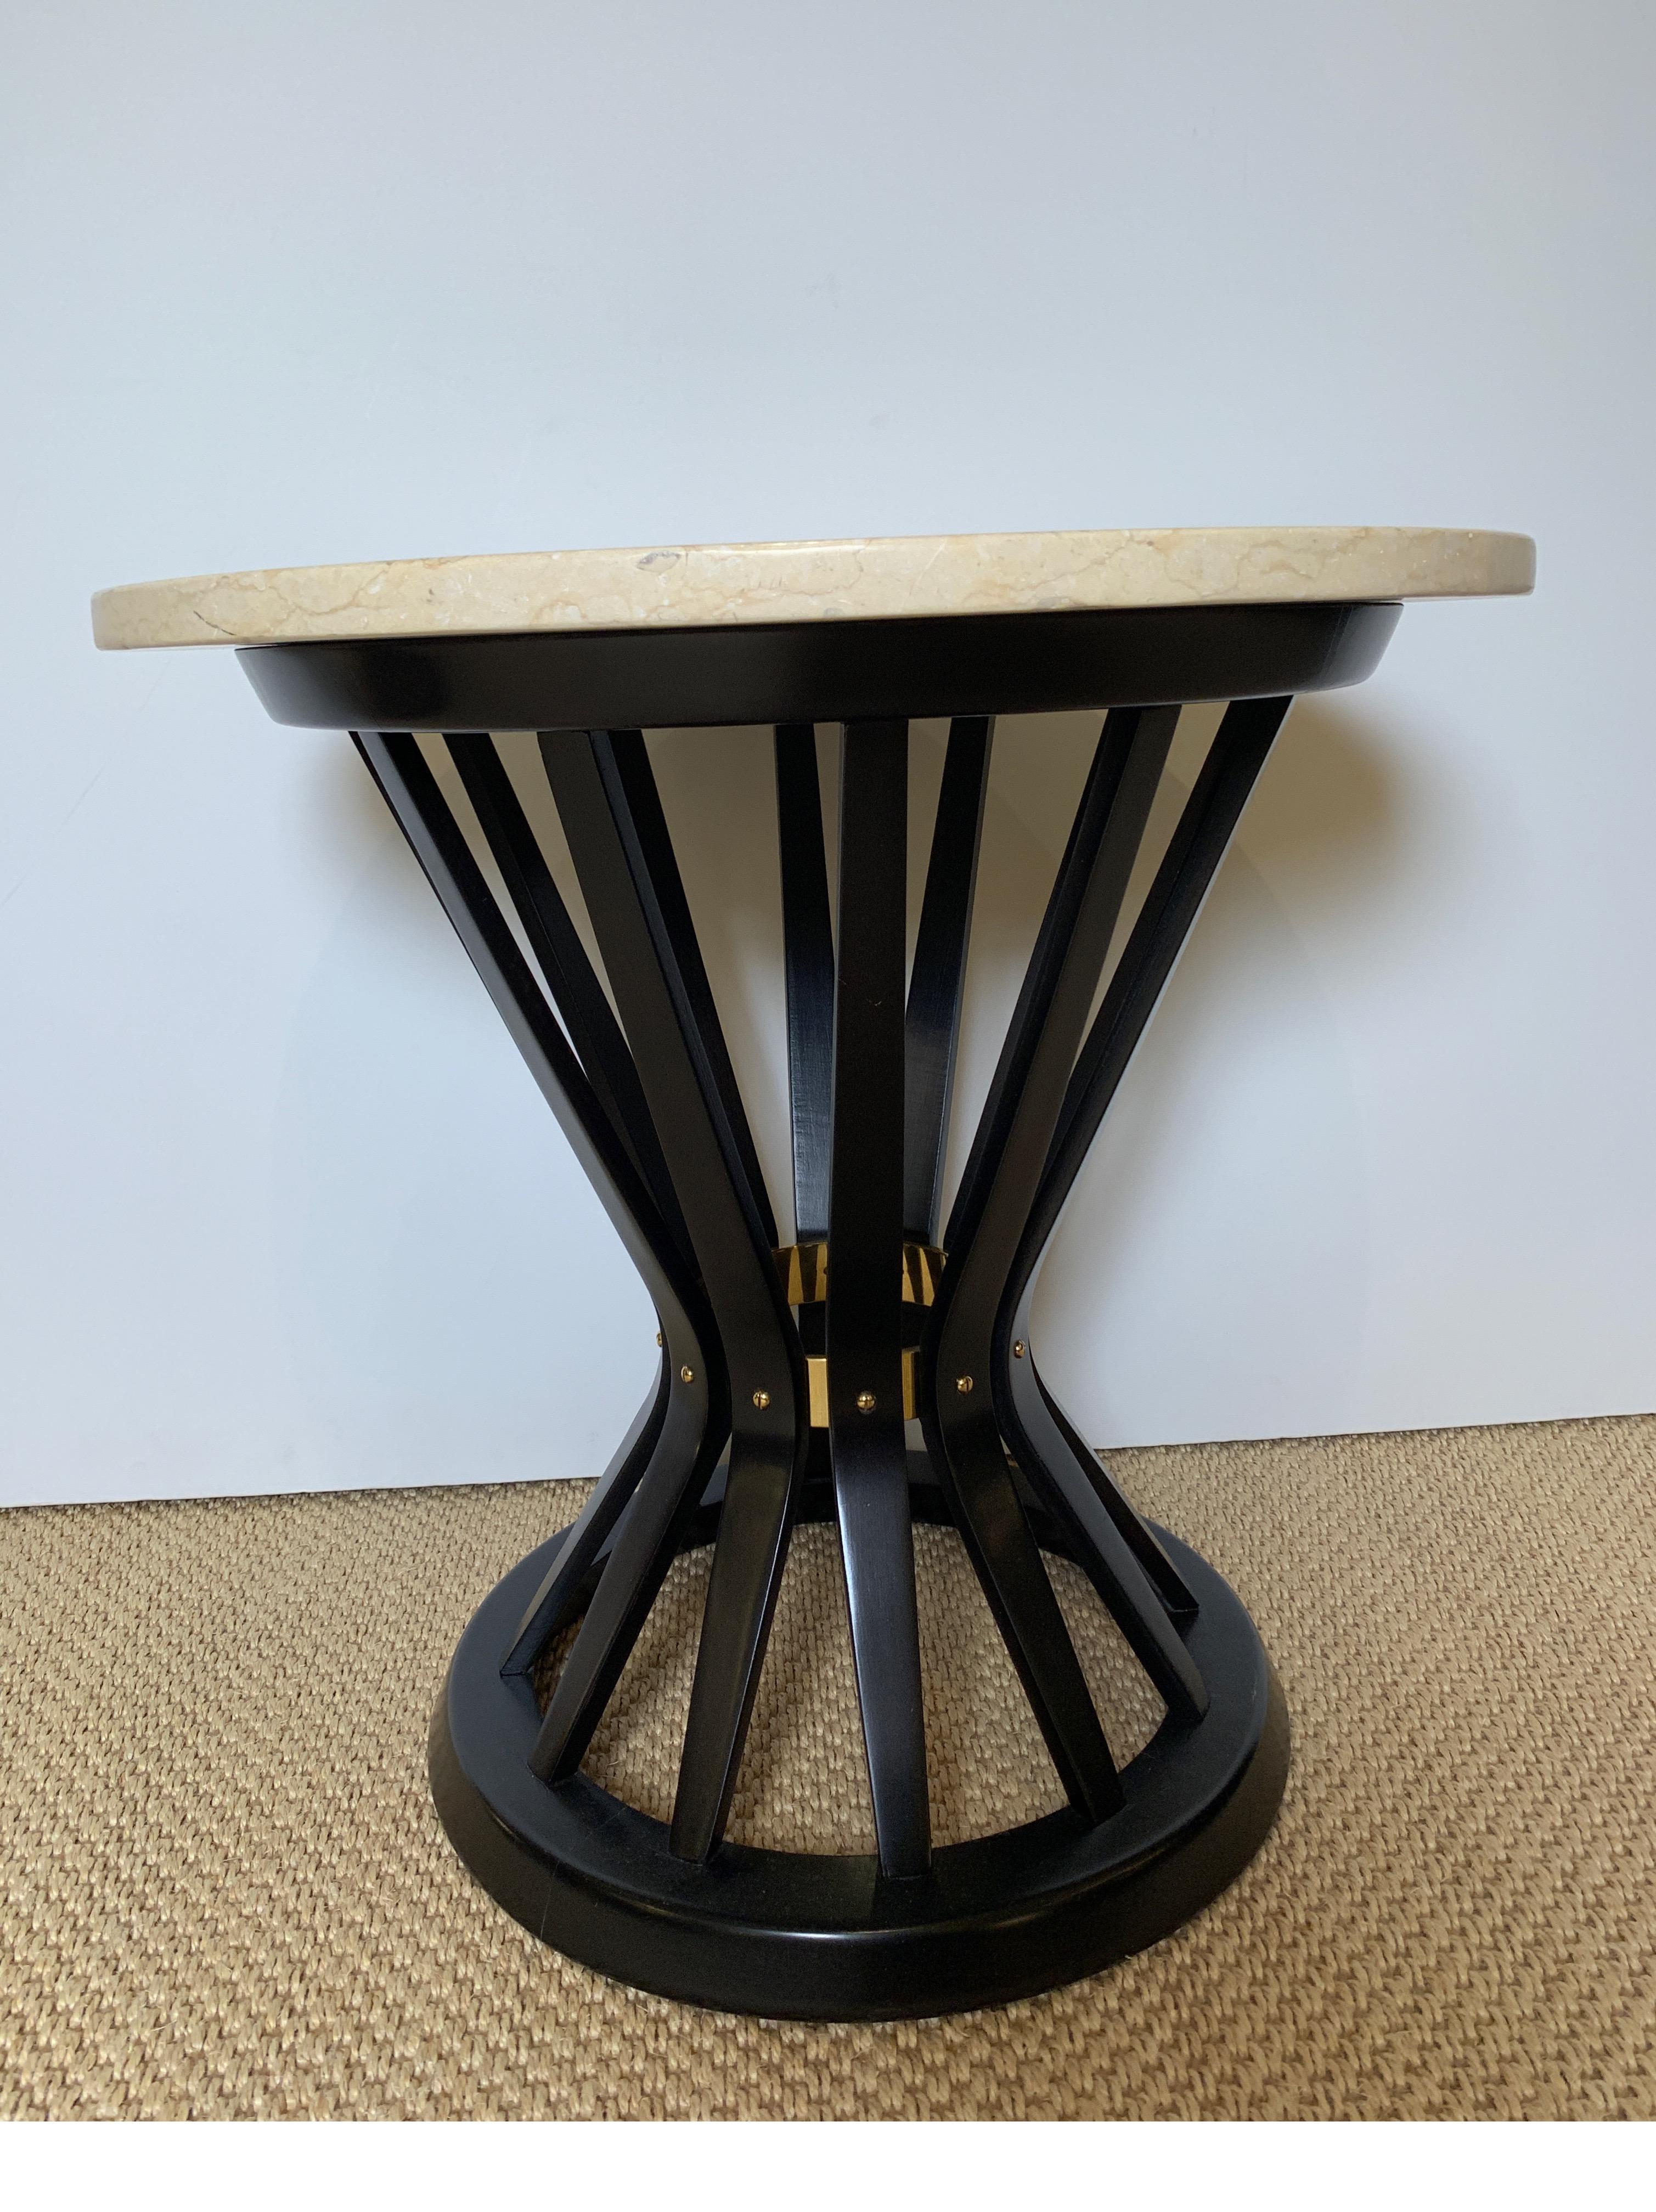 American Pair of Ebonized Side Tables with Travertine Tops by Edward Wormley for Dunbar